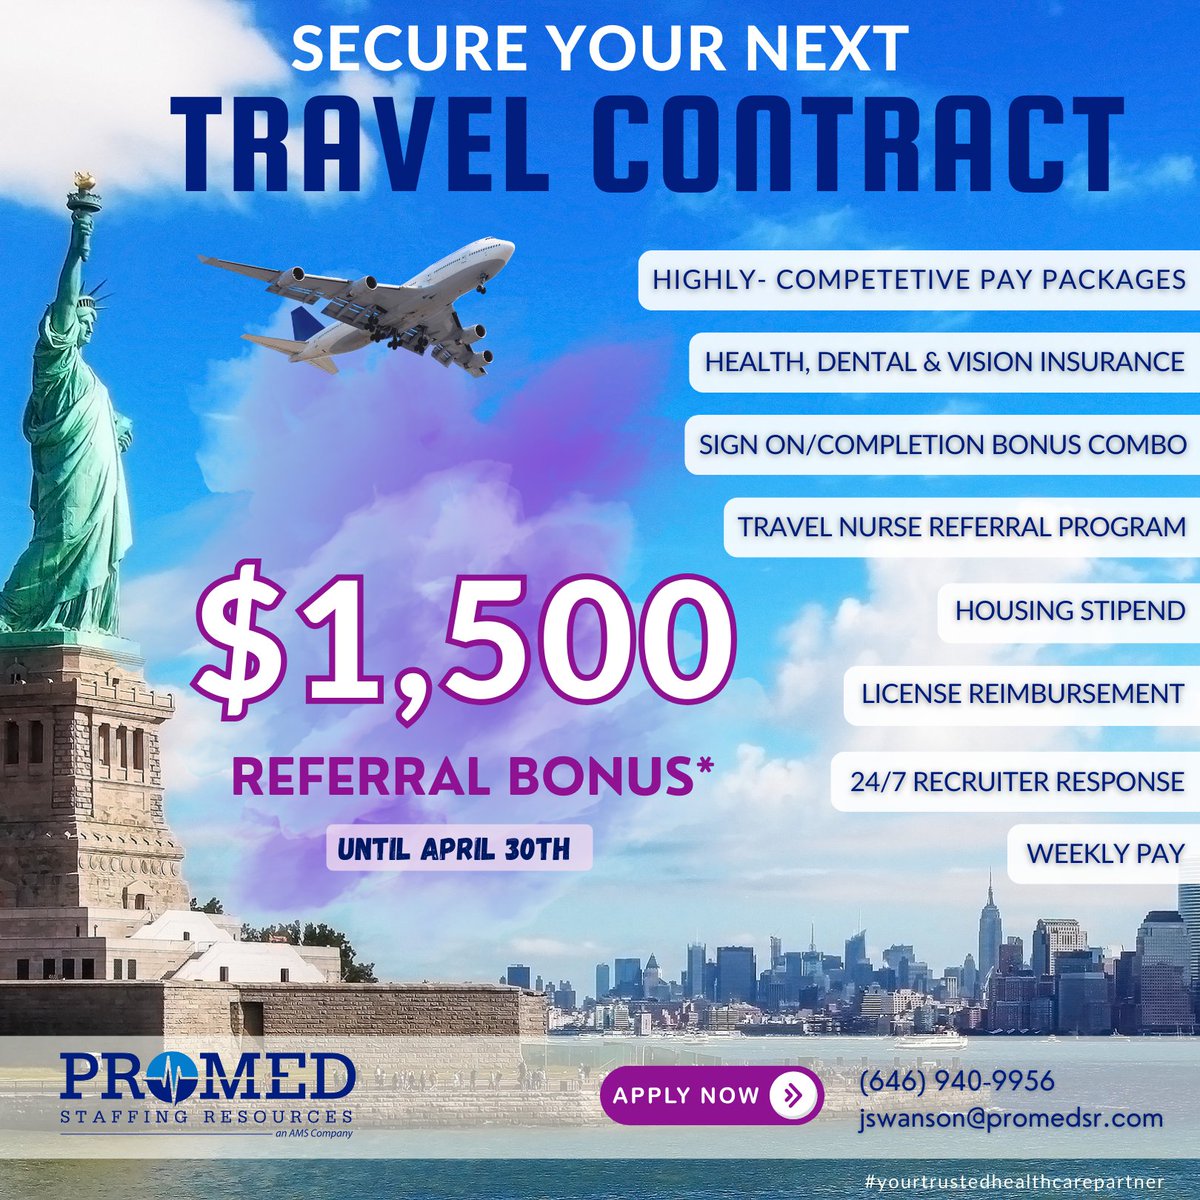 Step into a fresh week filled with exciting nationwide #travelnursing opportunities designed just for you by ProMed Staffing Resources! Connect with Jessica at (646) 940-9956 or jswanson@promedsr.com

#travelnurse #nurse #travelrn #hiring #assignments #travelnursejobs #promedsr